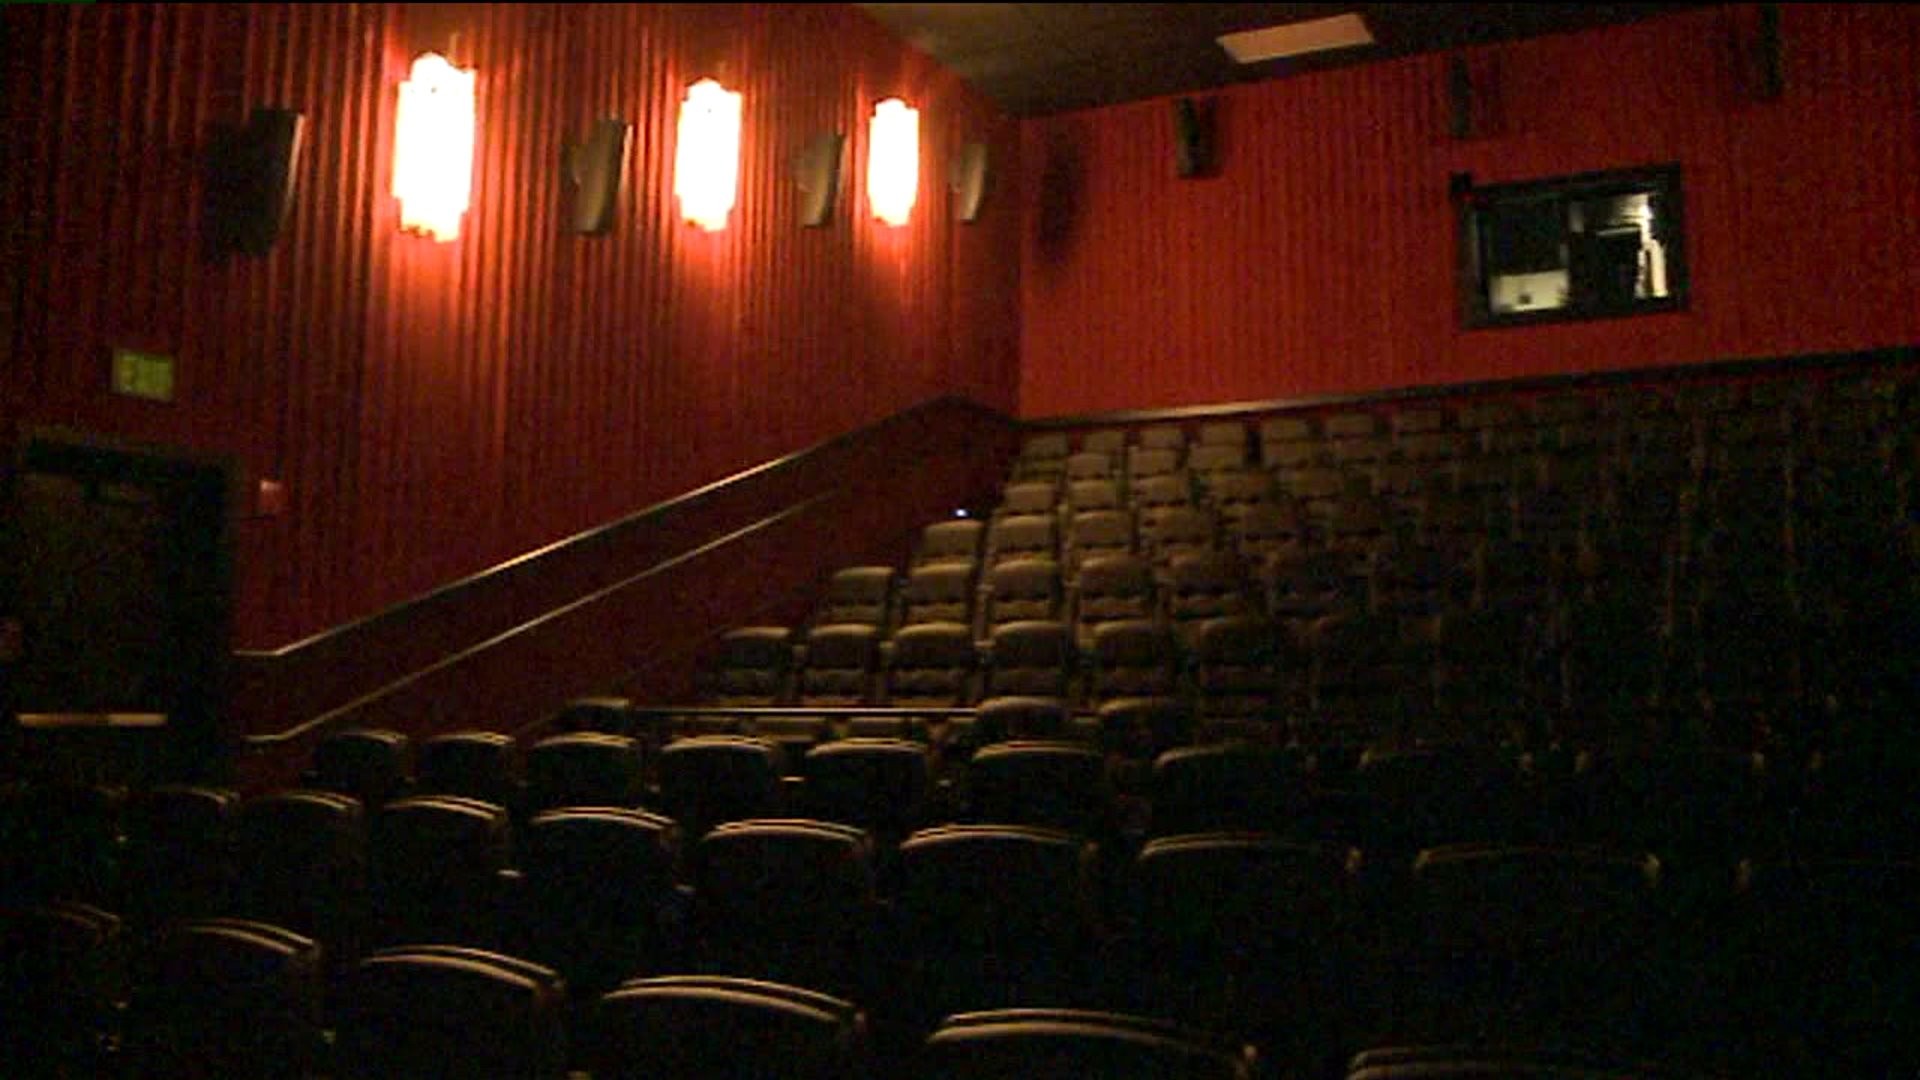 1920x1080 Man shot to death for texting in Florida movie theater: sheriff | New  York's PIX11 / WPIX-TV